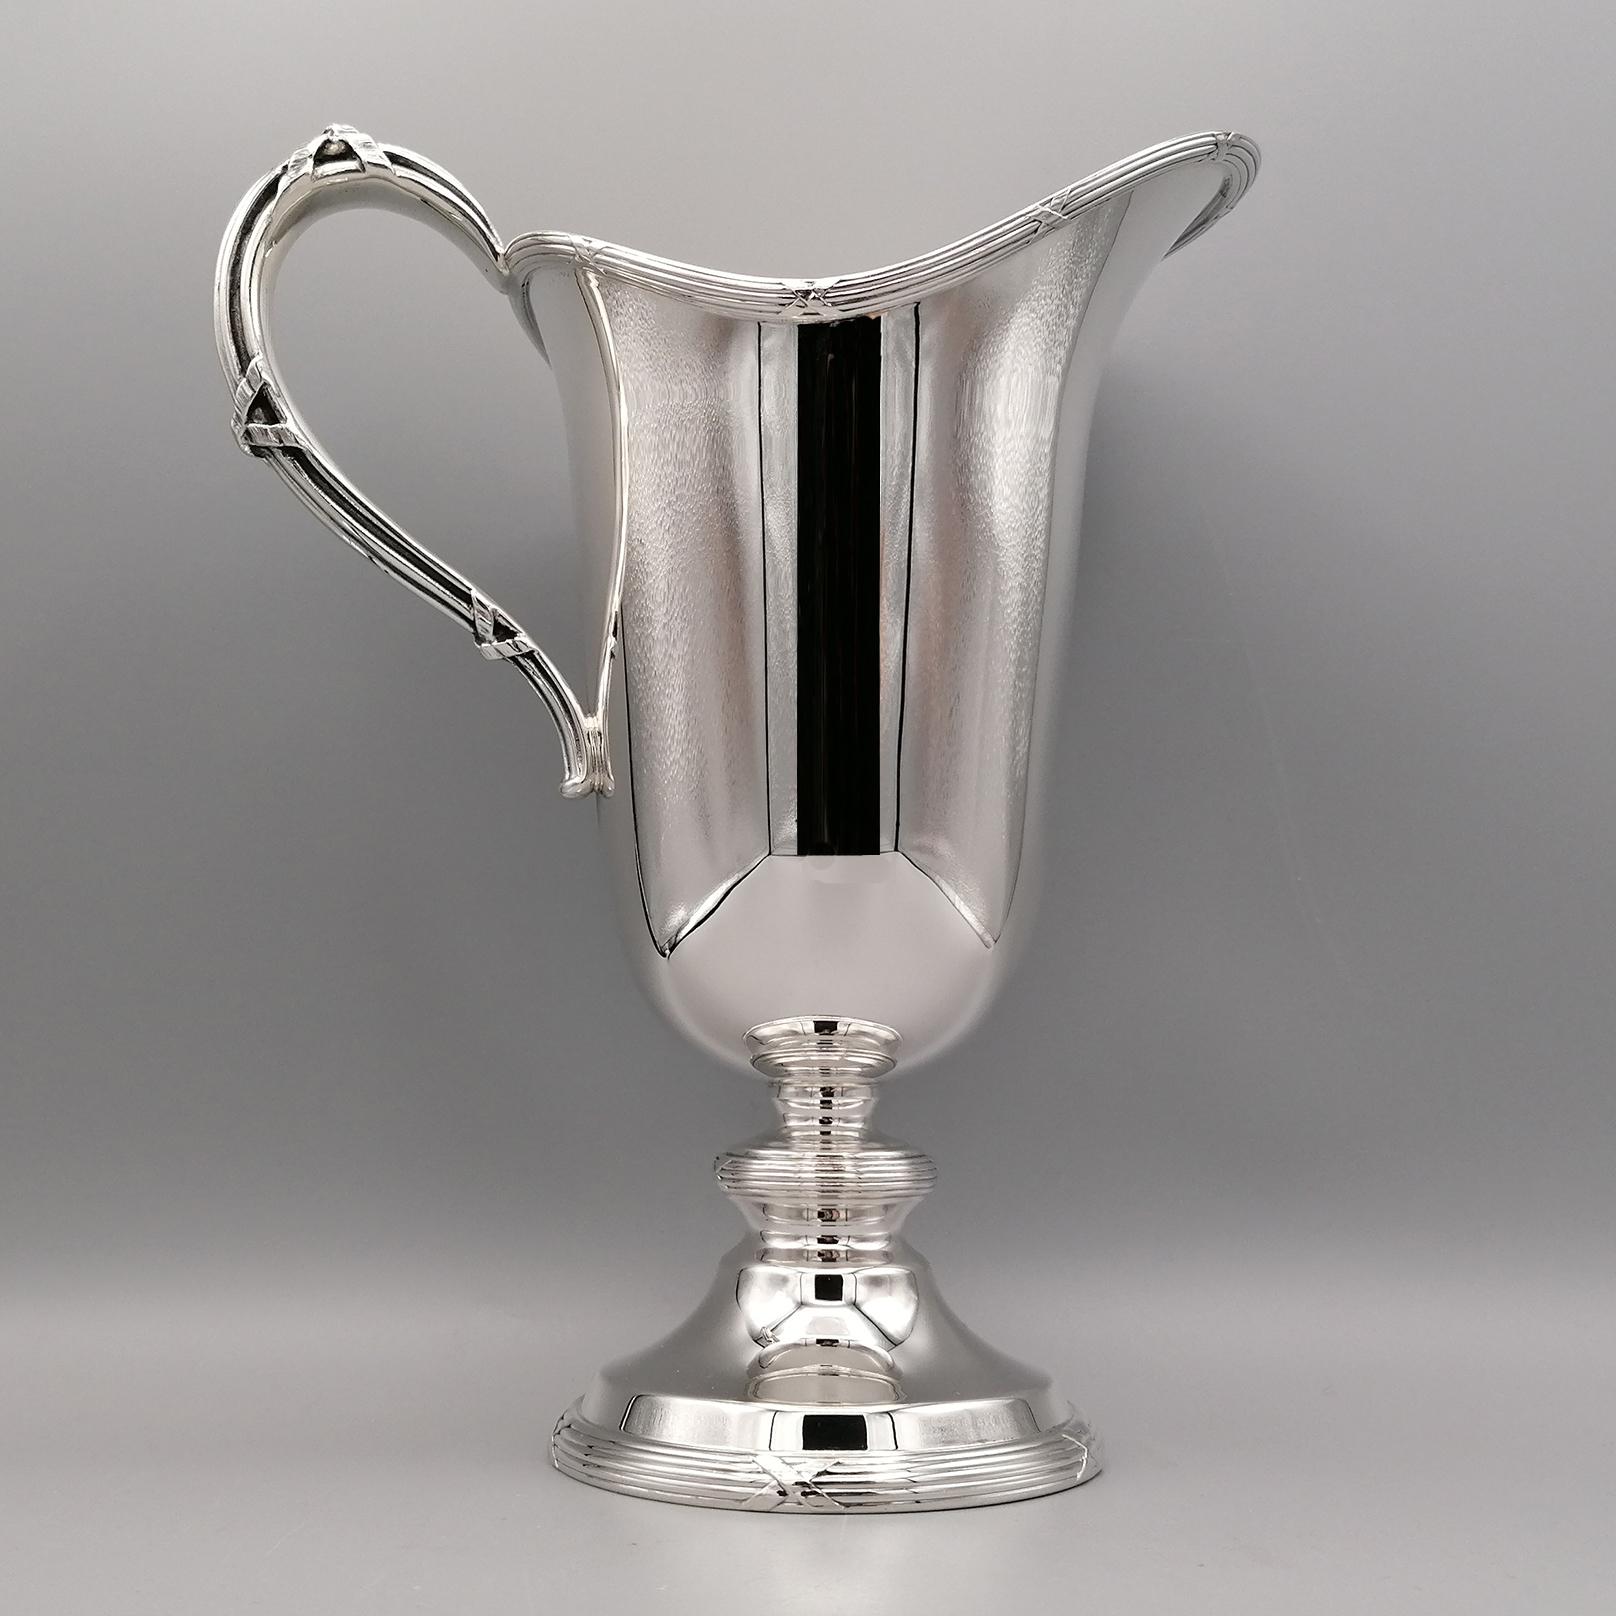 21st Century Italian Buccellati Sterling Silver Pitcher For Sale 2